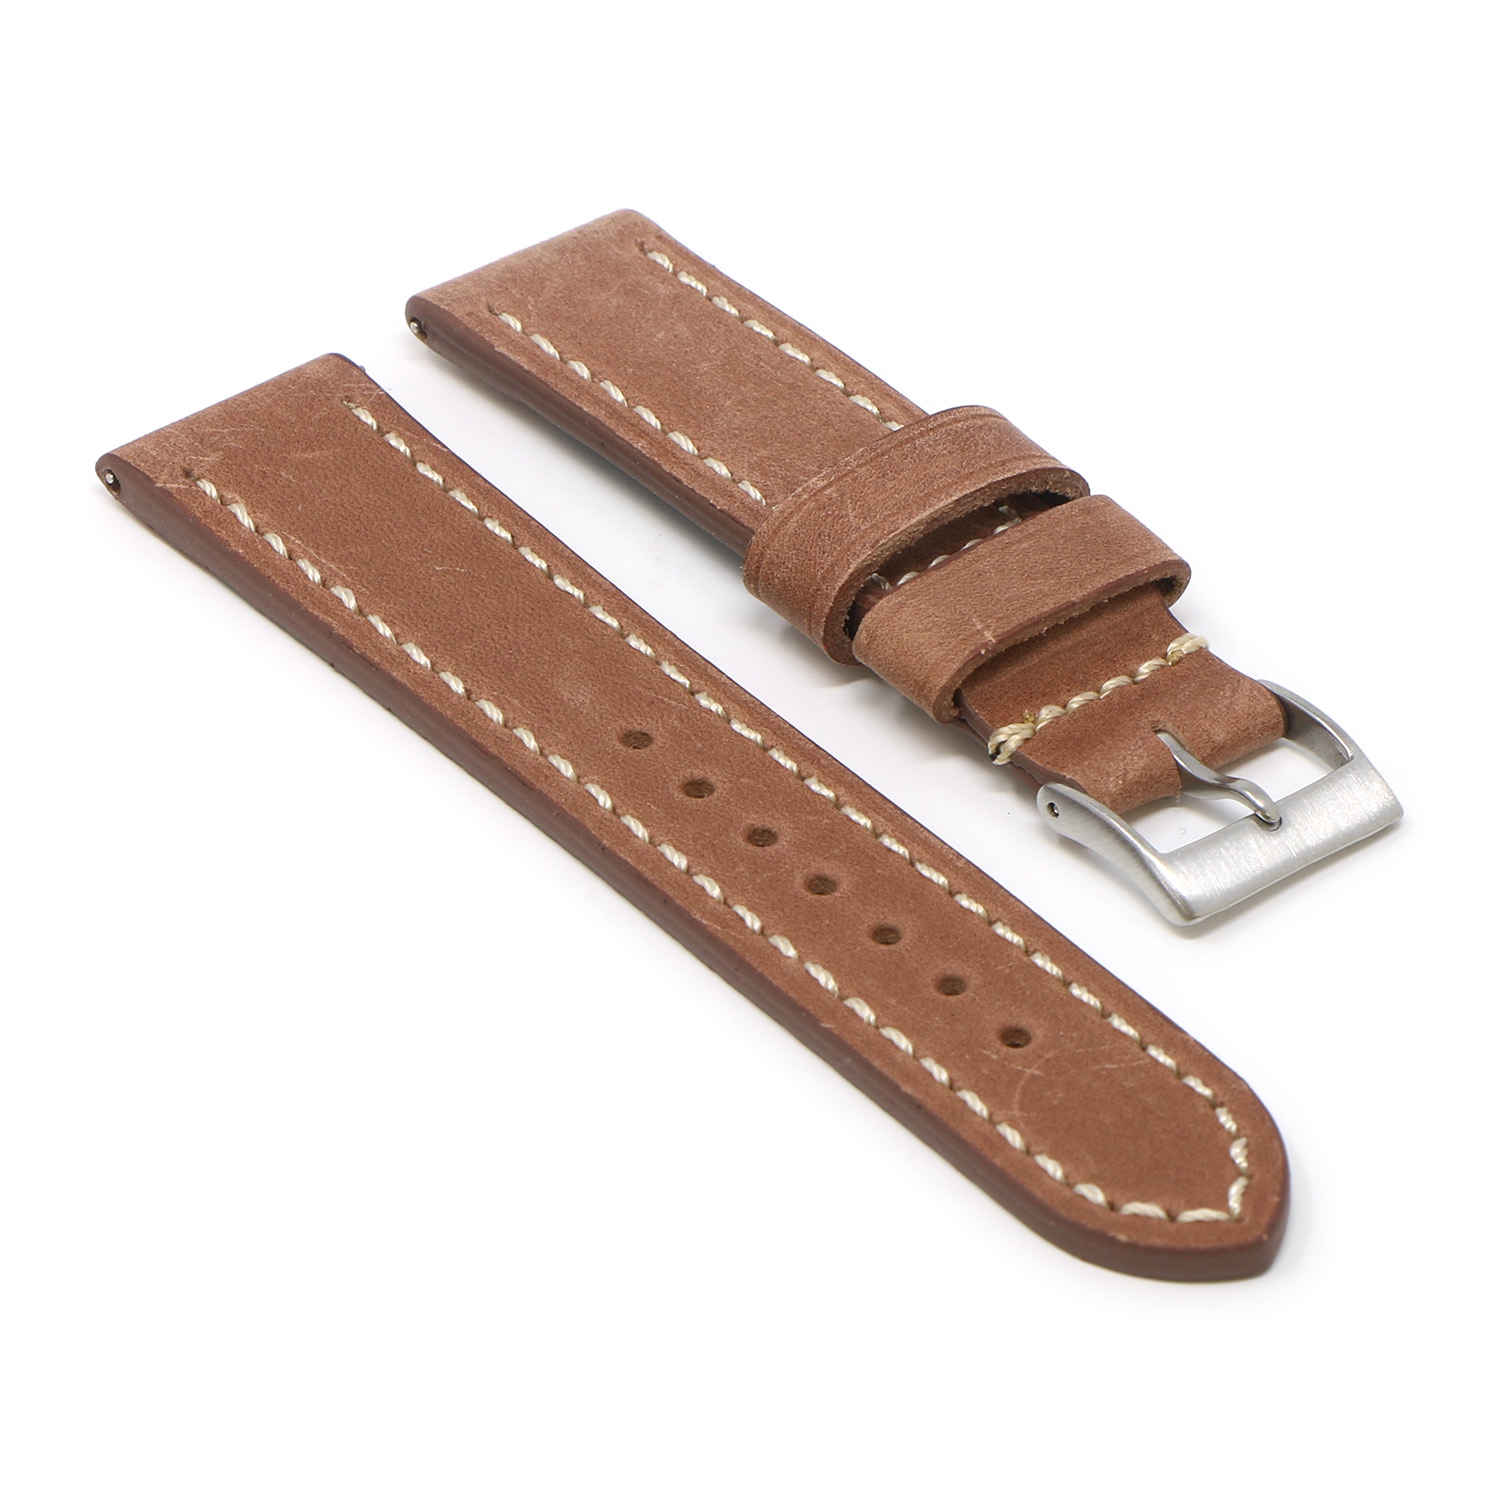 StrapsCo Vintage Leather Watch Band Strap (Short, Standard, Long) for Fitbit Charge 4 & Charge 3 - Long - Oak Brown